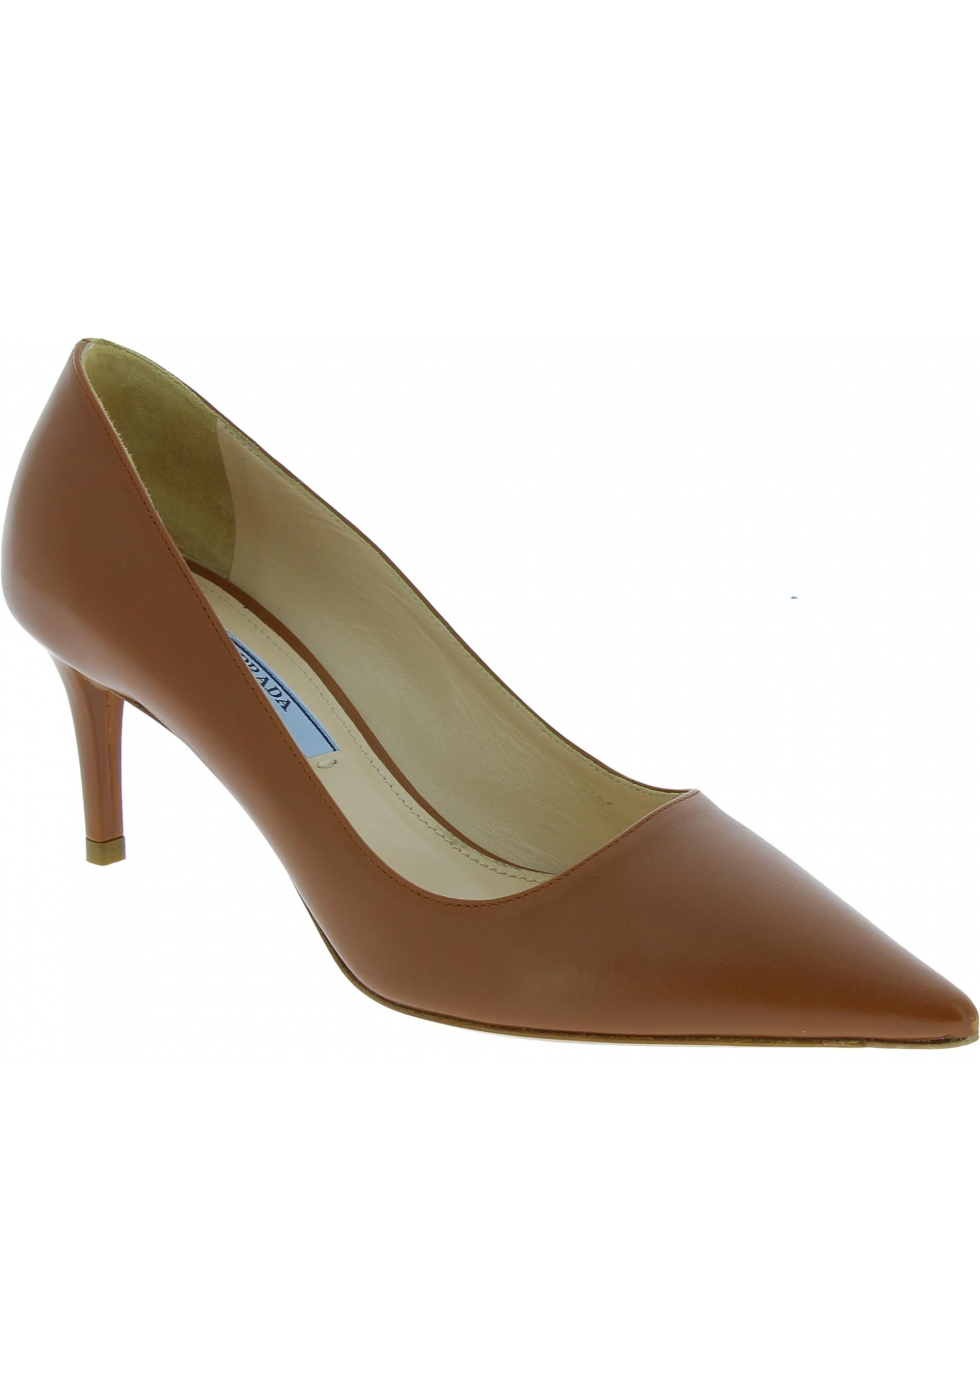 Prada Women&#39;s pointed toe classic pumps shoes in hazel shiny calf leather - Italian Boutique